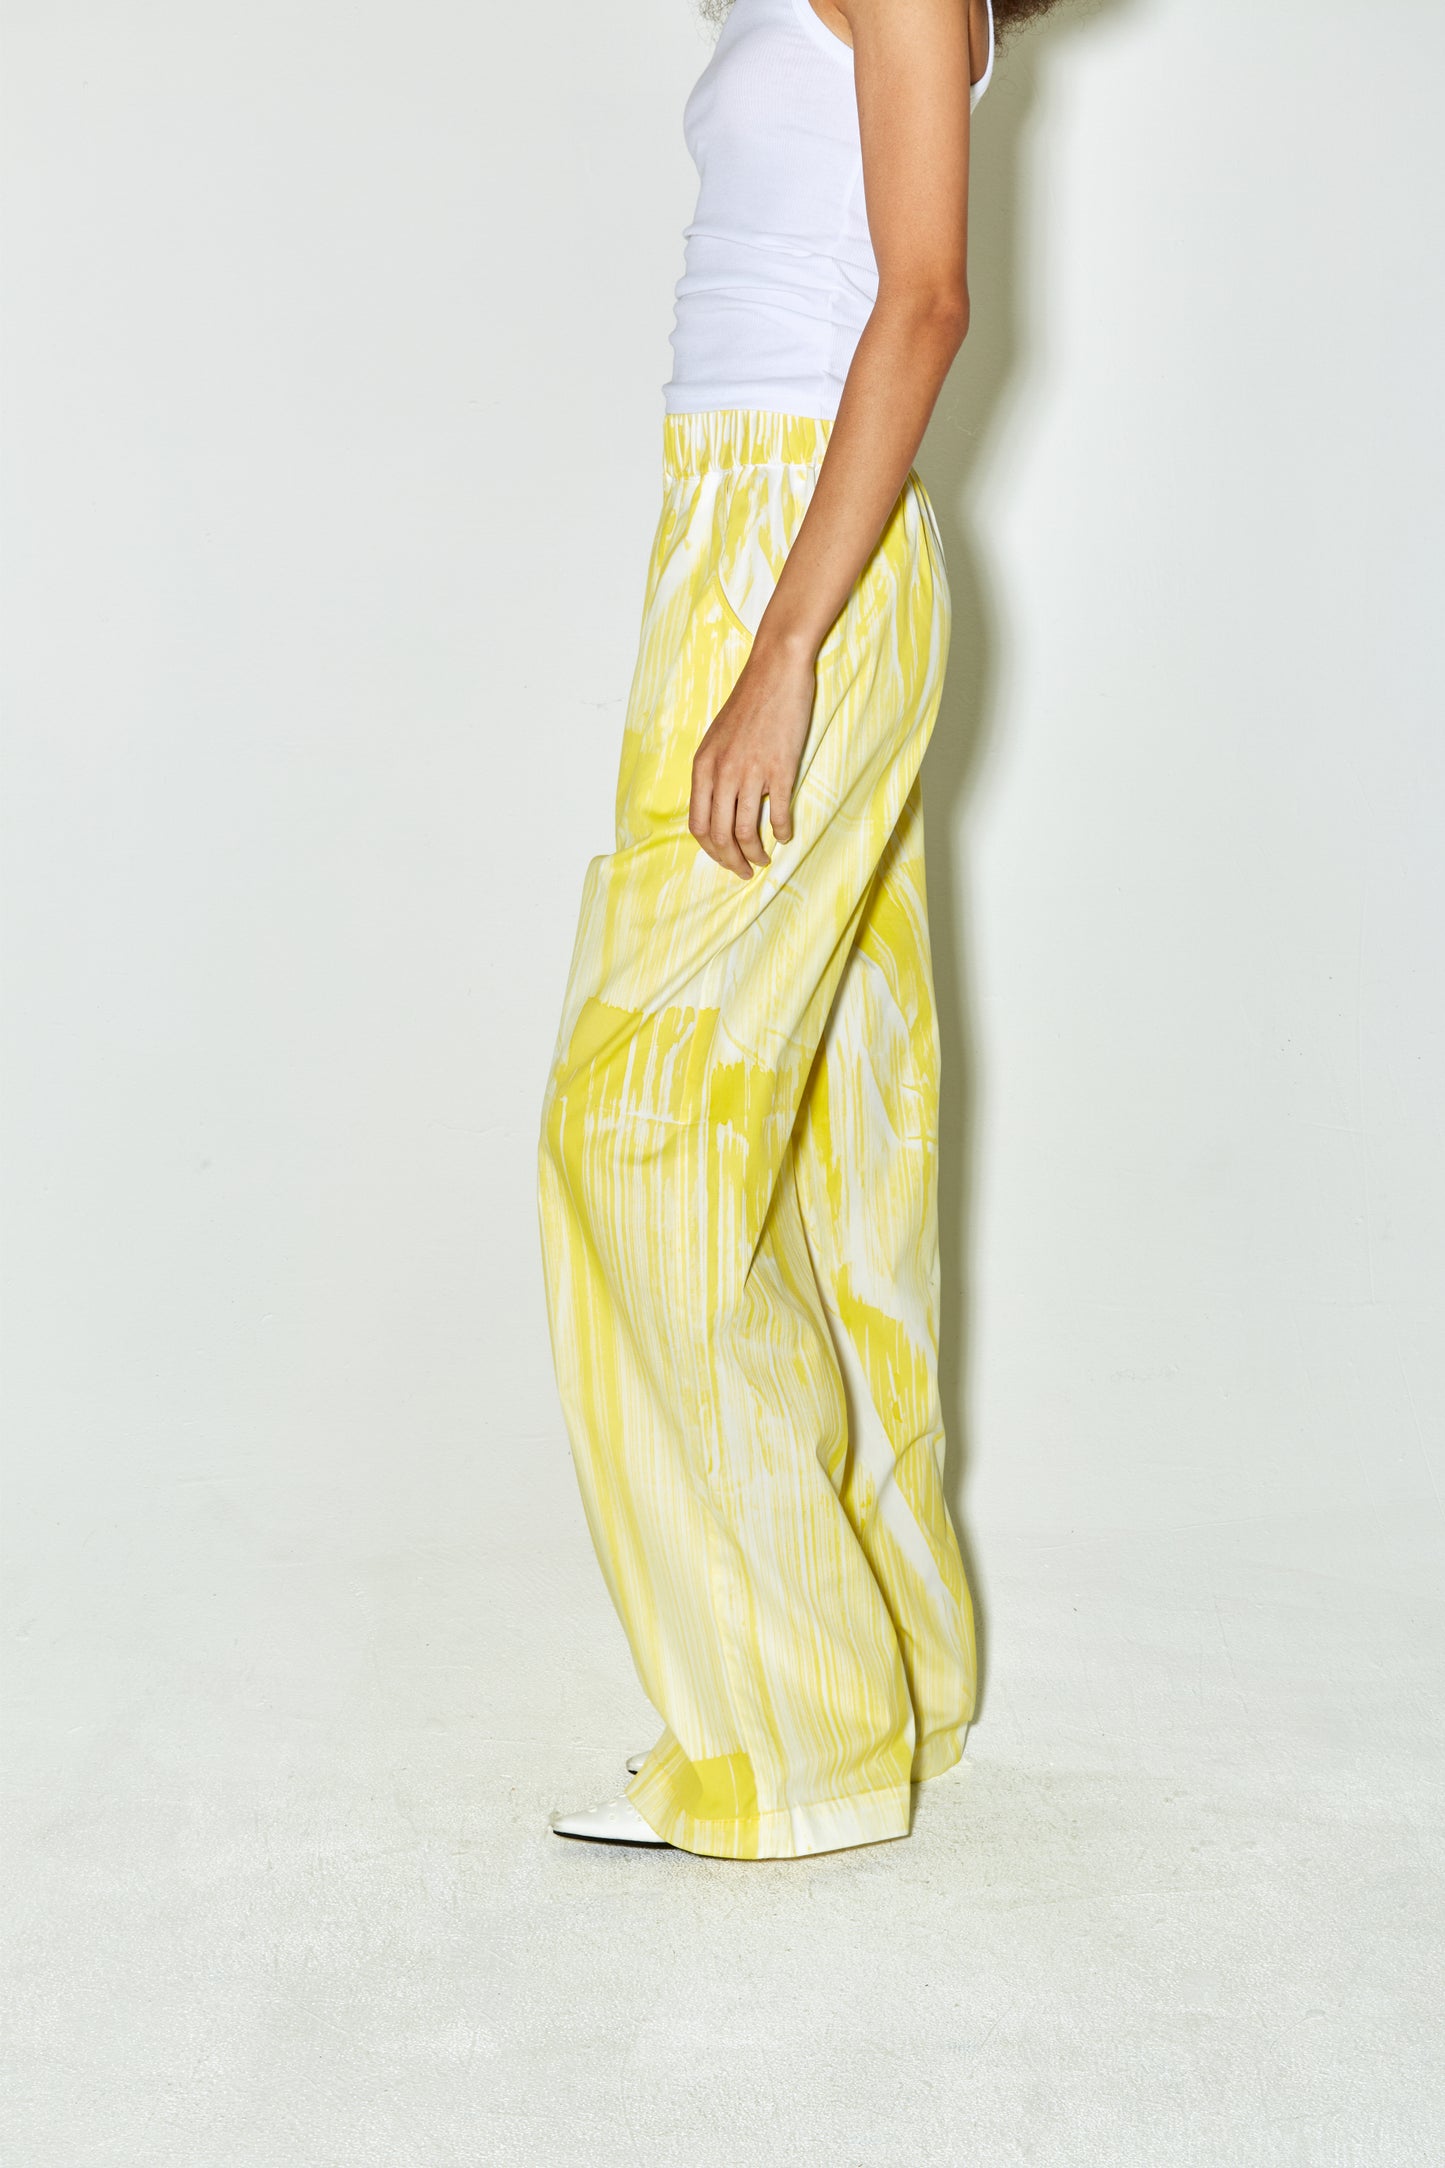 POLLY pants yellow brush dyed